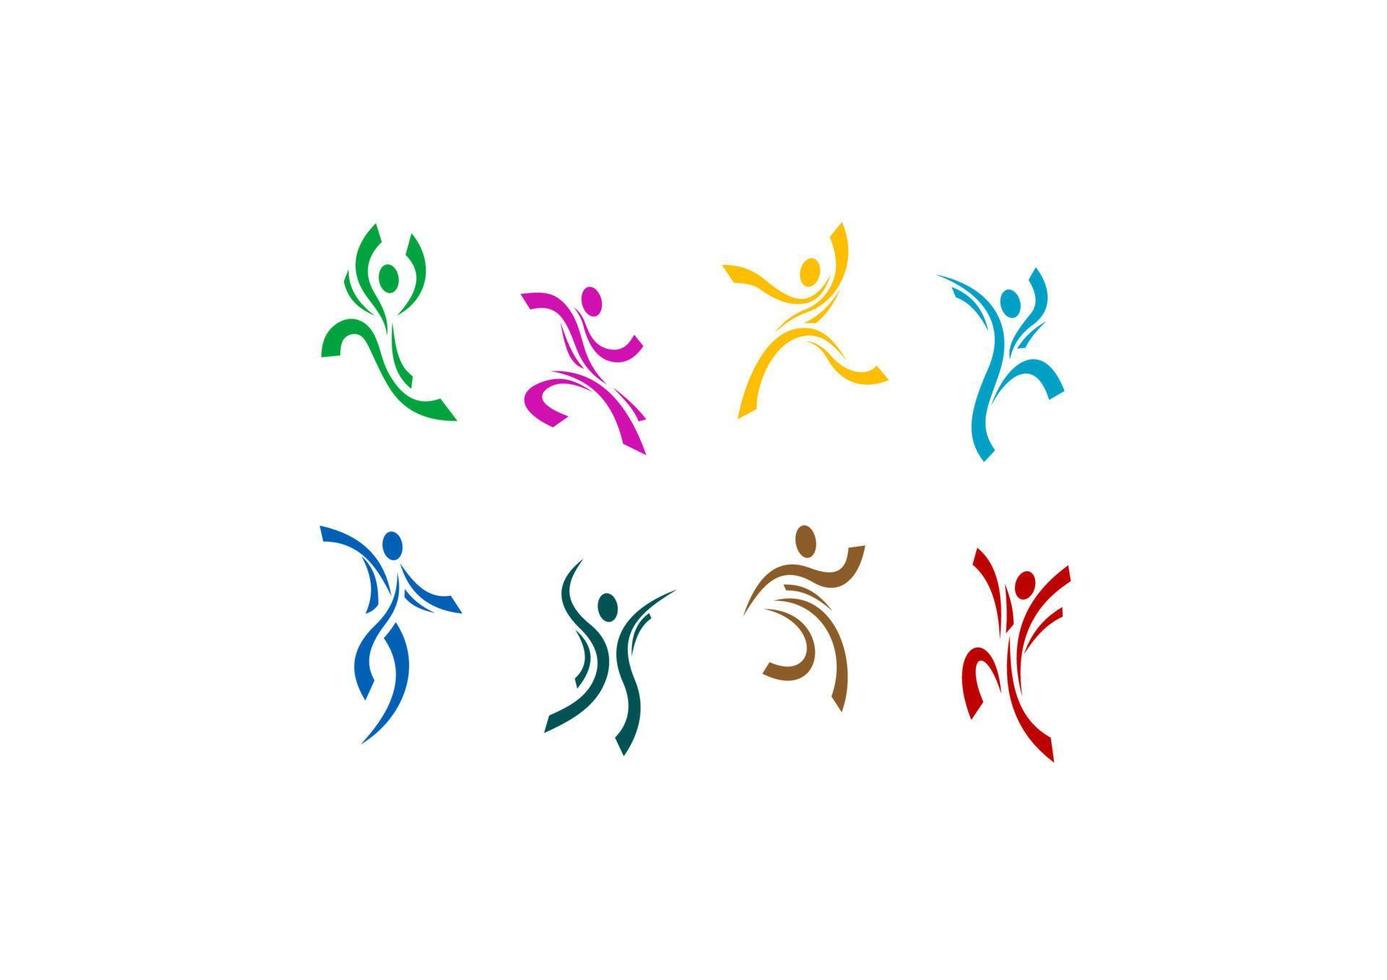 Dancing and jumping peoples vector